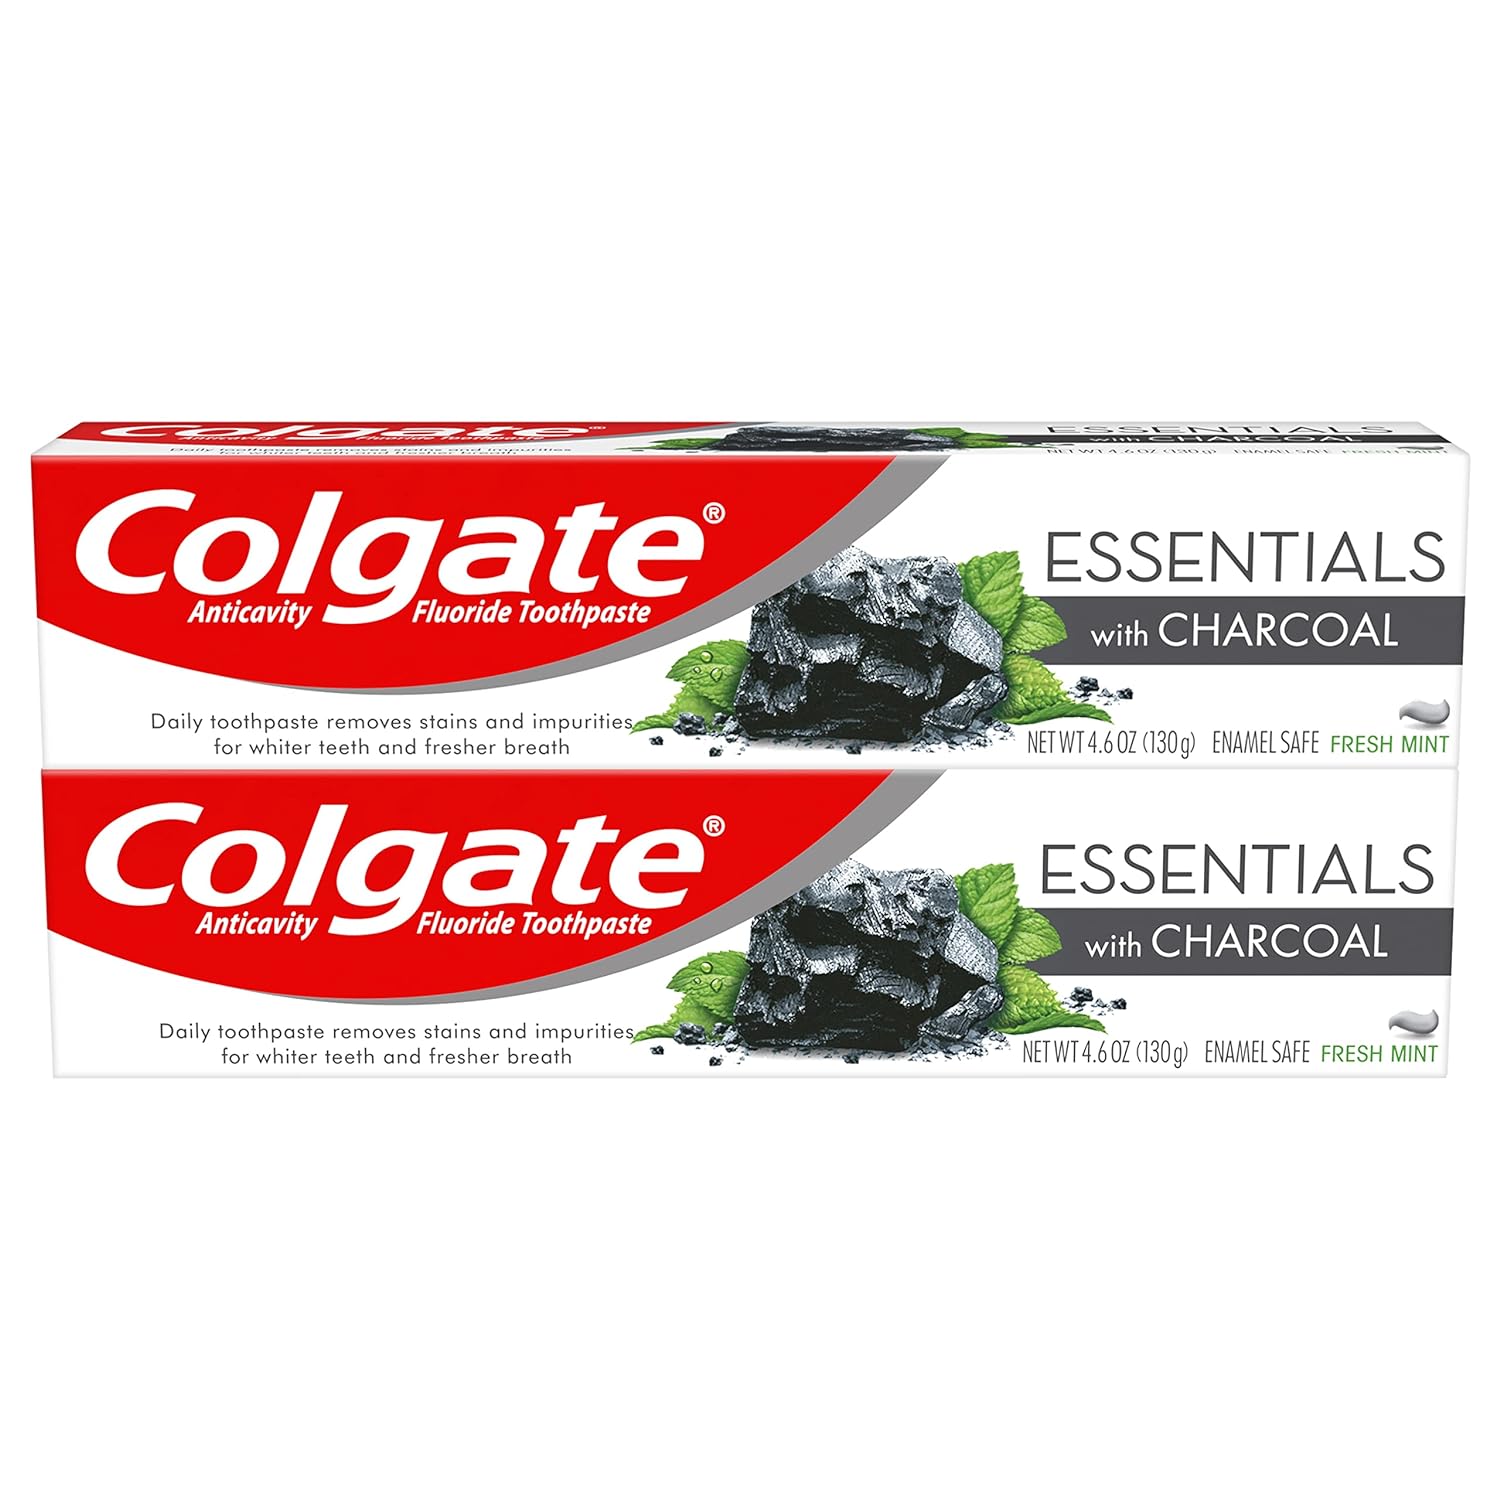 Colgate Charcoal Teeth Whitening Toothpaste, Natural Mint Flavor, Vegan, 4.6 Ounce, 2 Pack